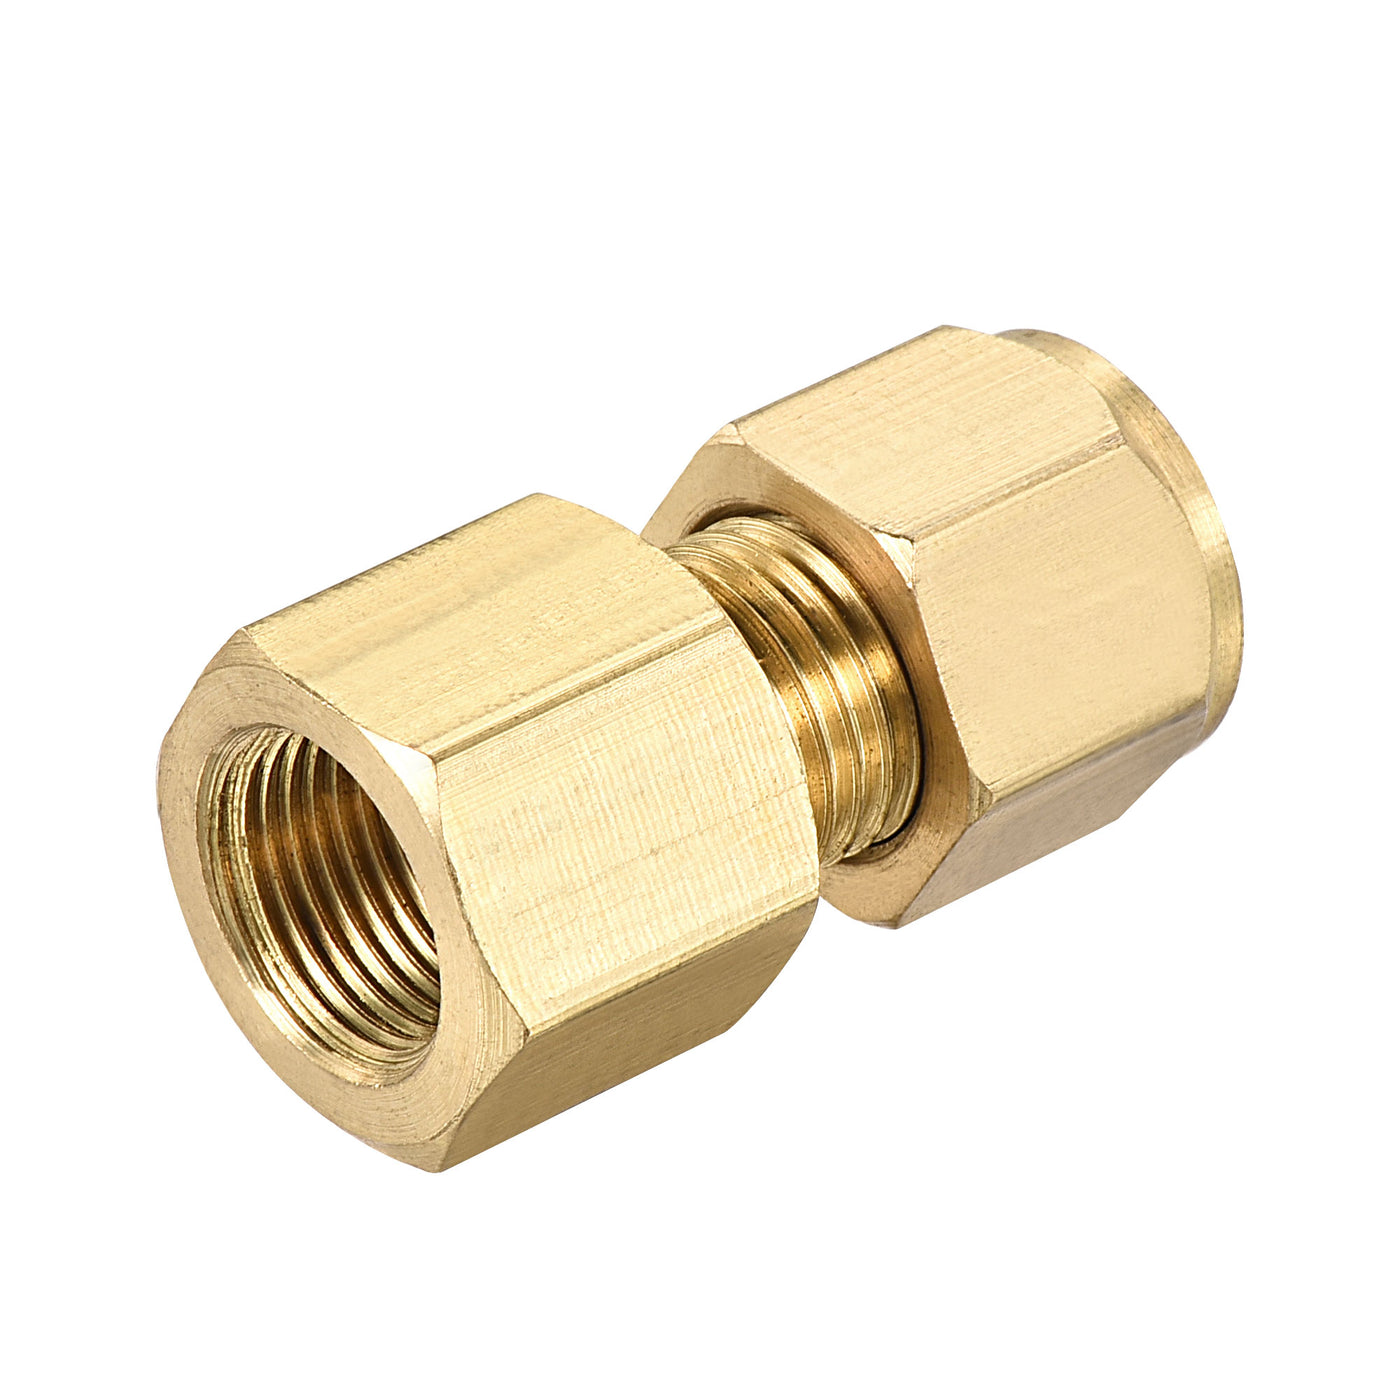 Uxcell Uxcell Compression Tube Fitting M18x1.5mm Female Thread x 6mm Tube OD Straight Coupling Adapter Brass